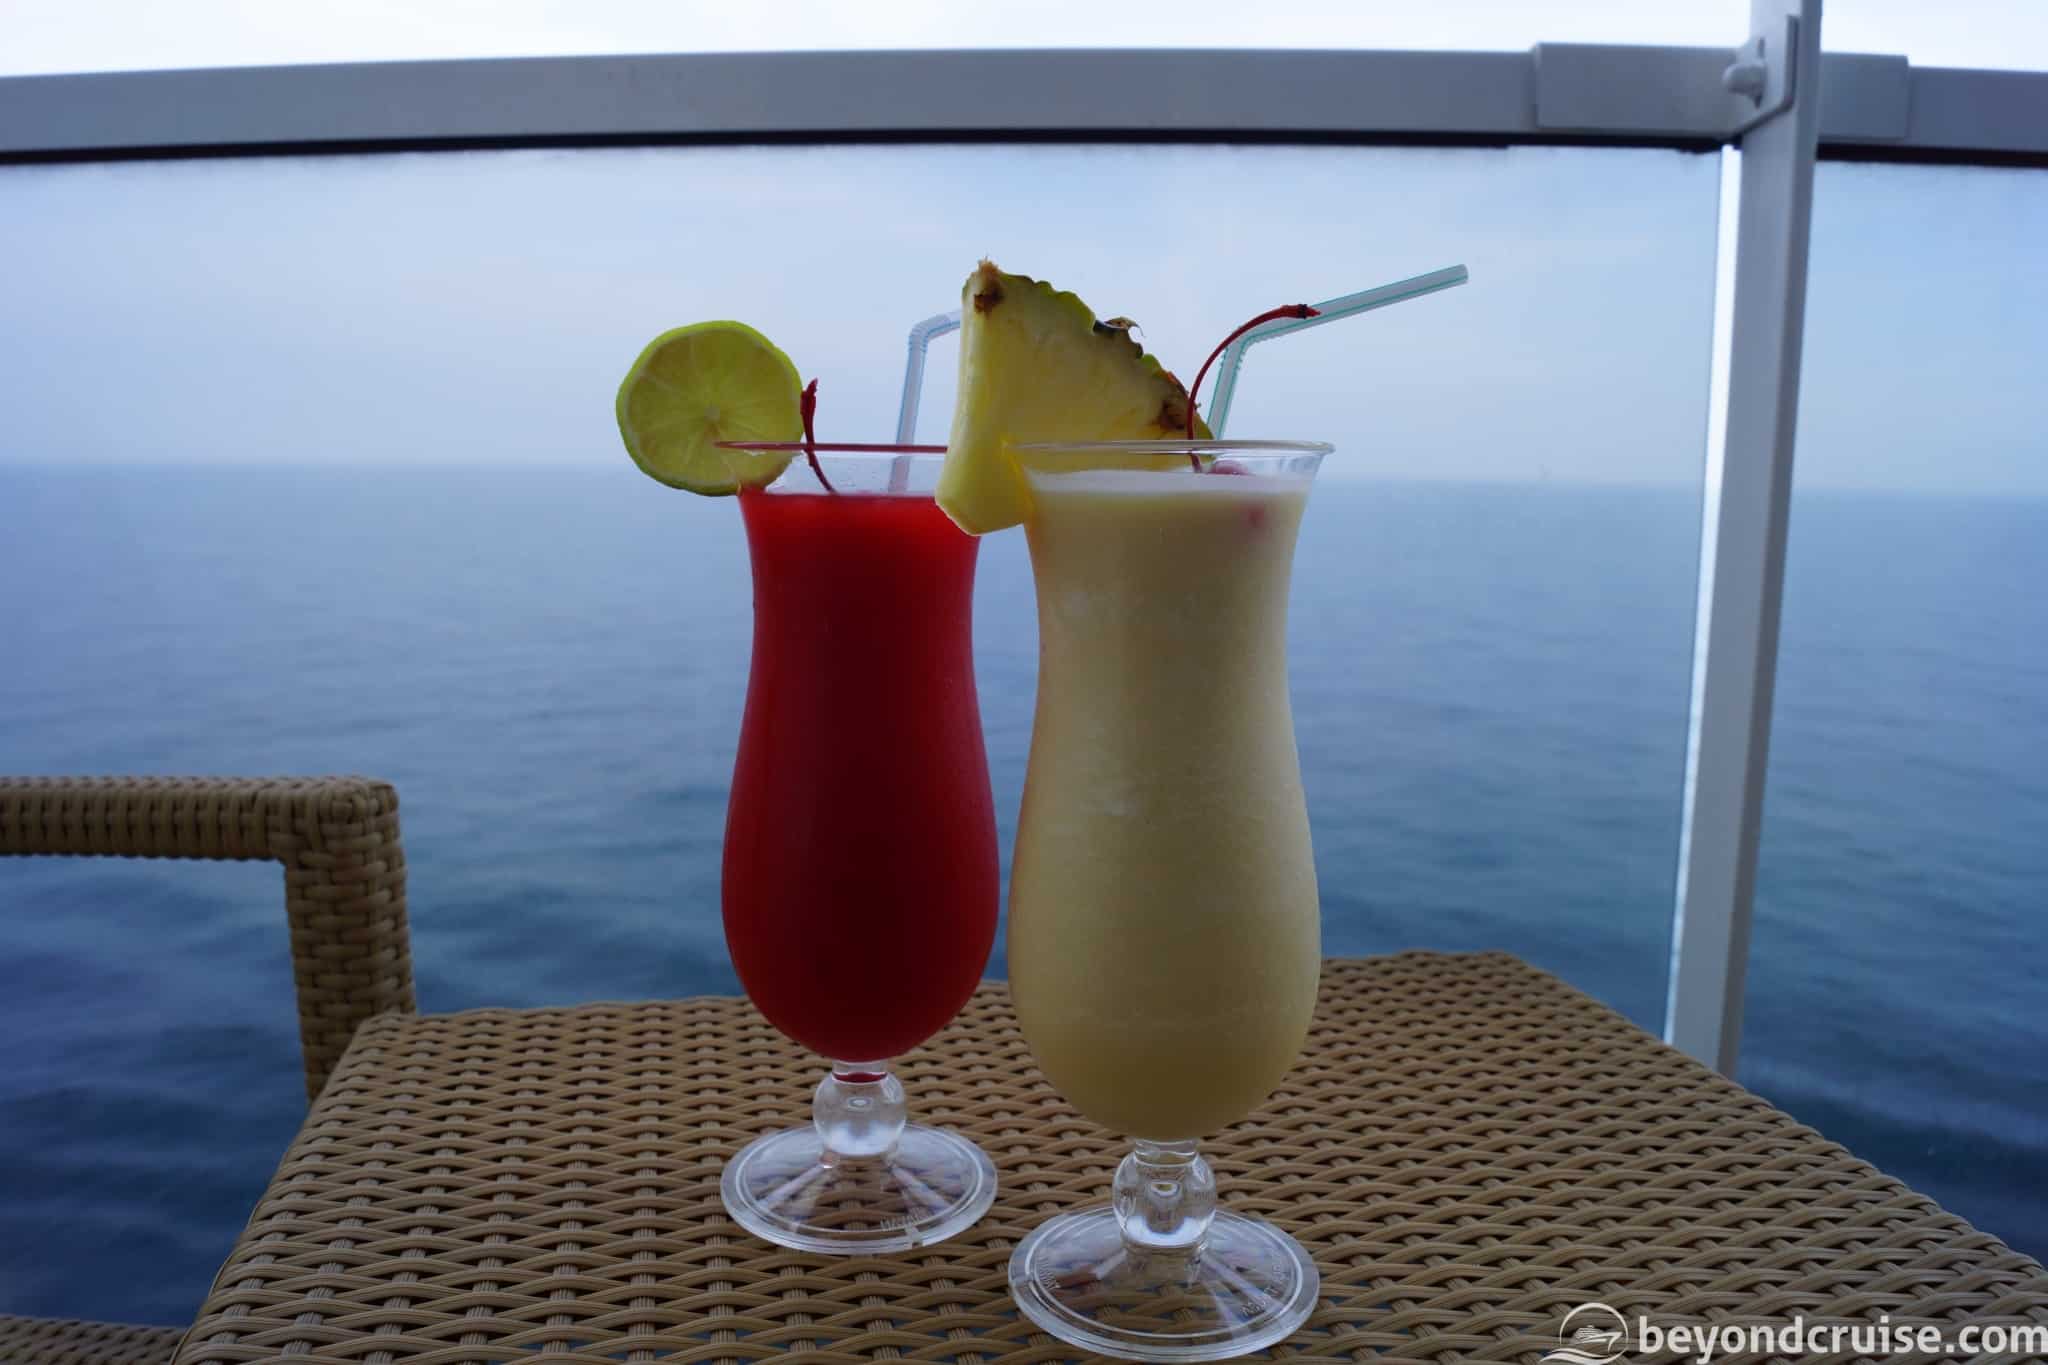 MSC Magnifica Cocktails on the balcony